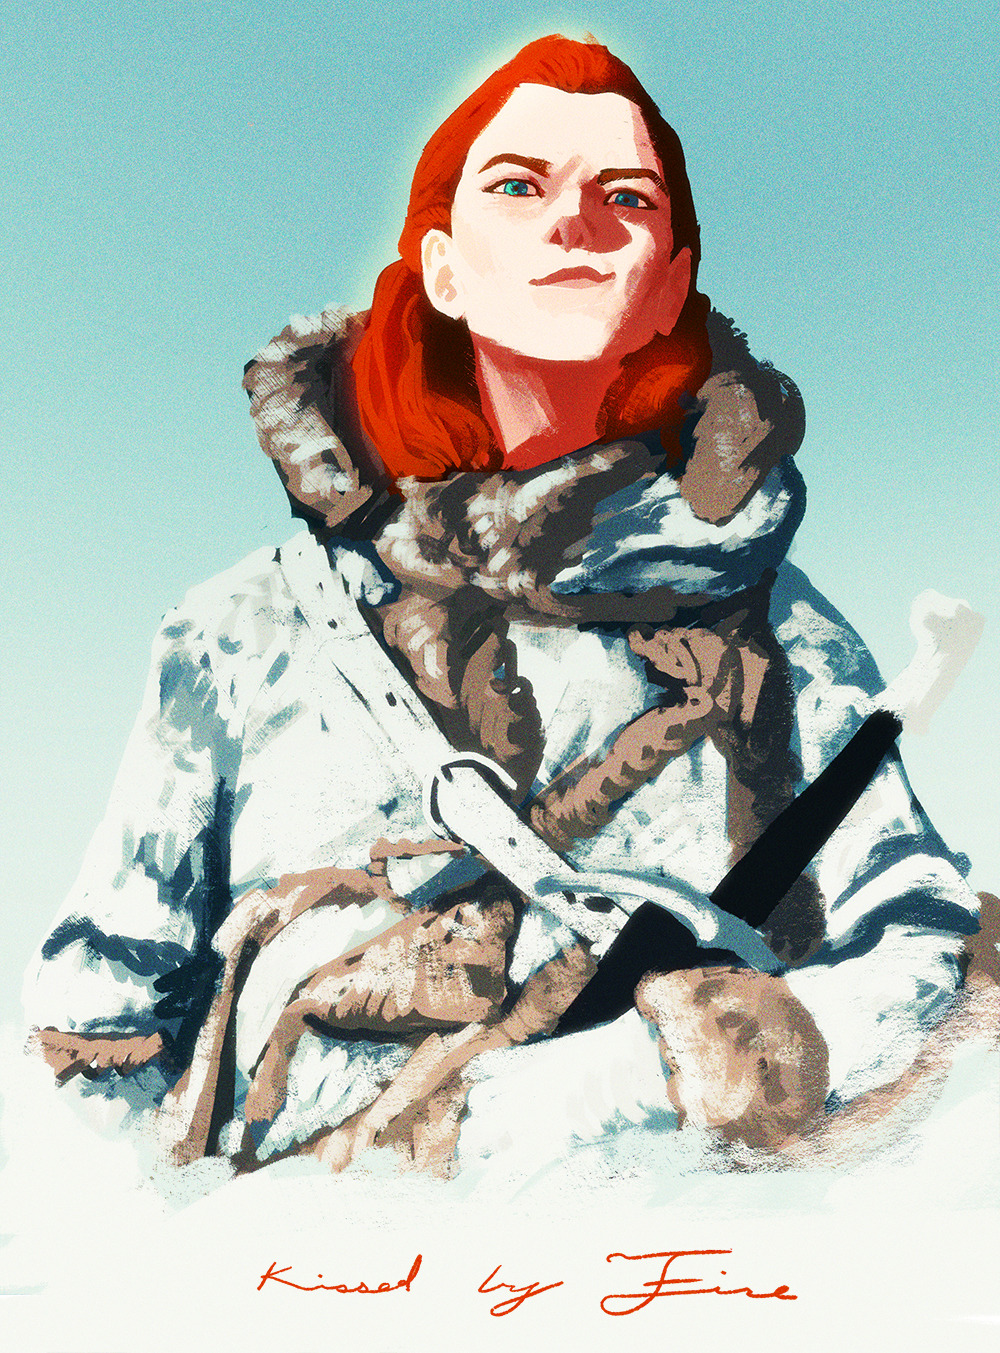 Ygritte, Game of Thrones